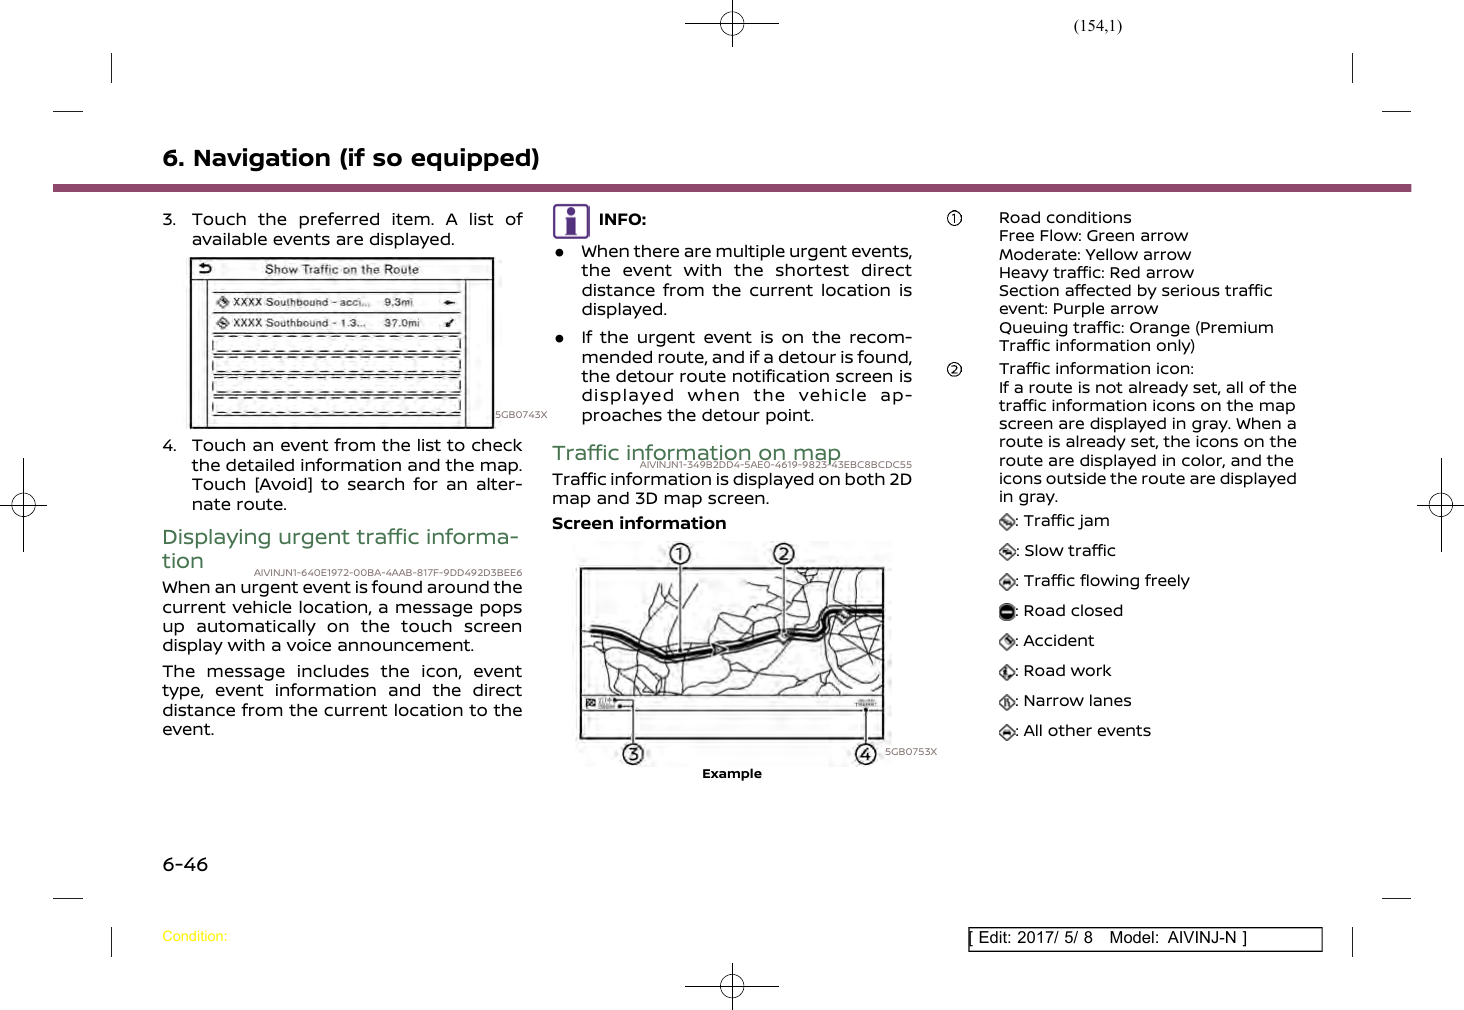 Page 154 of Robert Bosch Car Multimedia AIVICMFB0 Navigation System with Bluetooth and WLAN User Manual